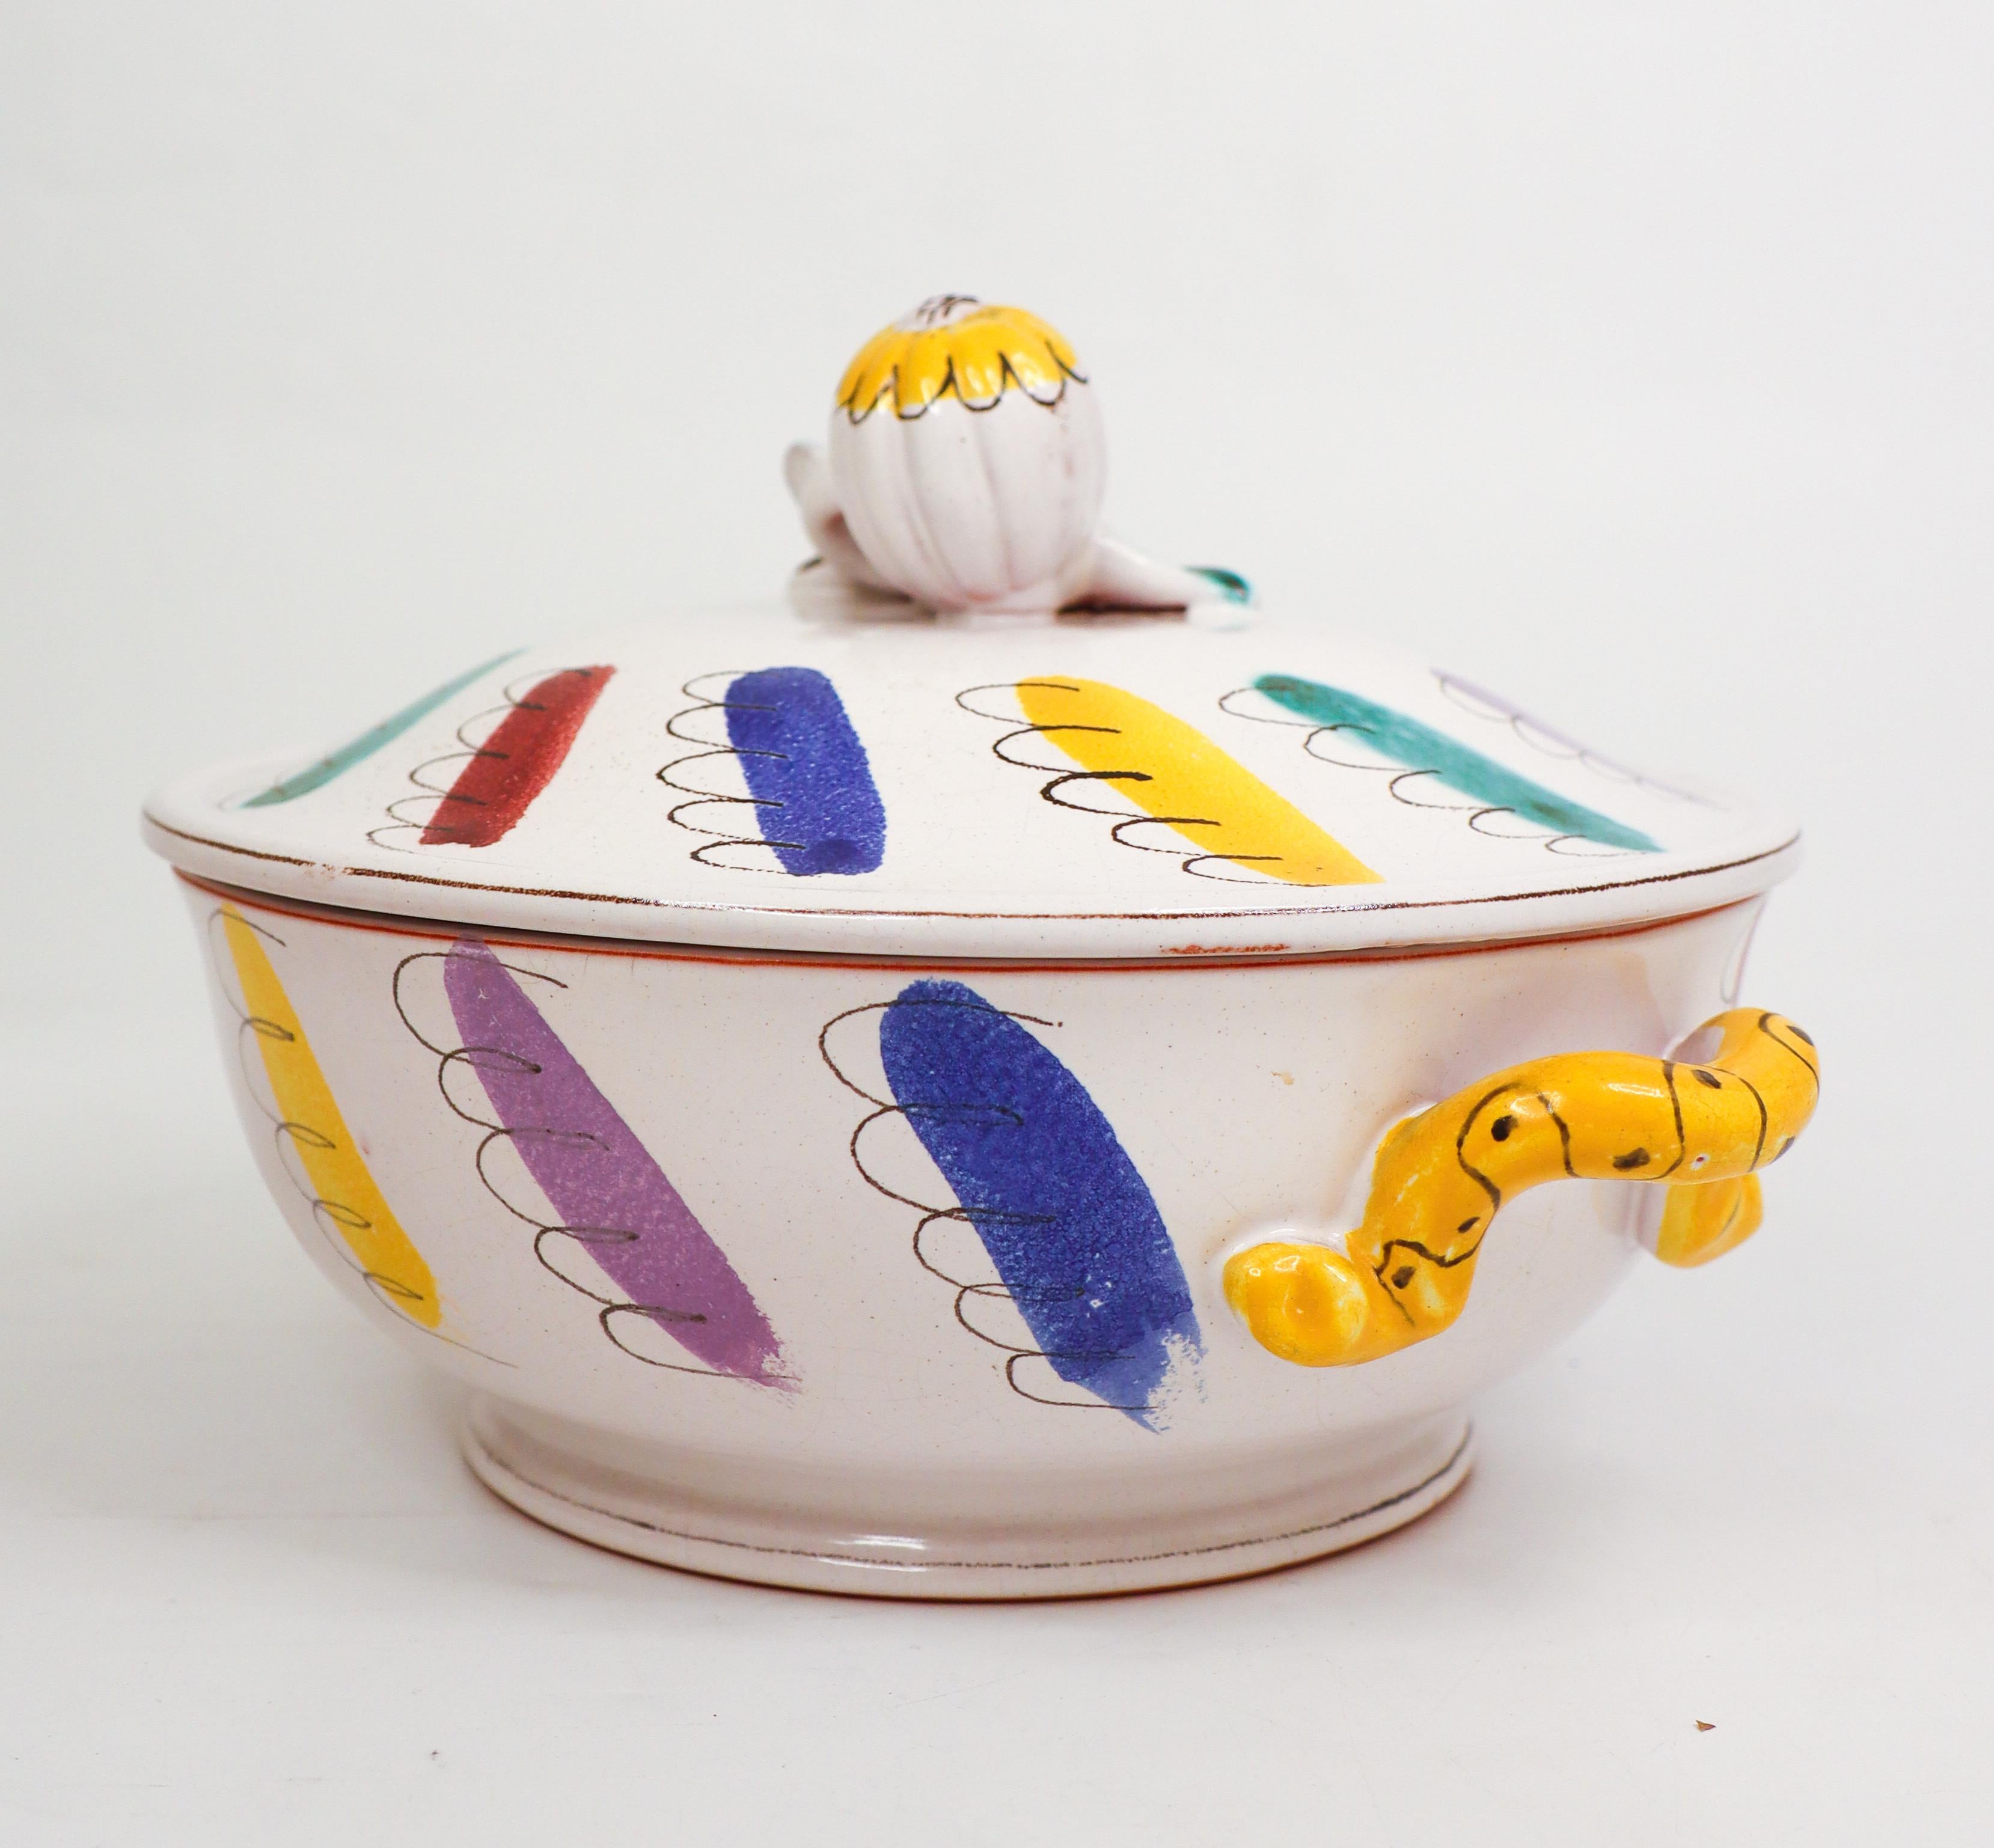 Ursula Printz was one of Stig Lindbergs most appreciated faience painters, she also made some own pieces which this is. The shape is also used by many of Stig Lindbergs items. This tureen or lidded bowl is 24 cm (9,6